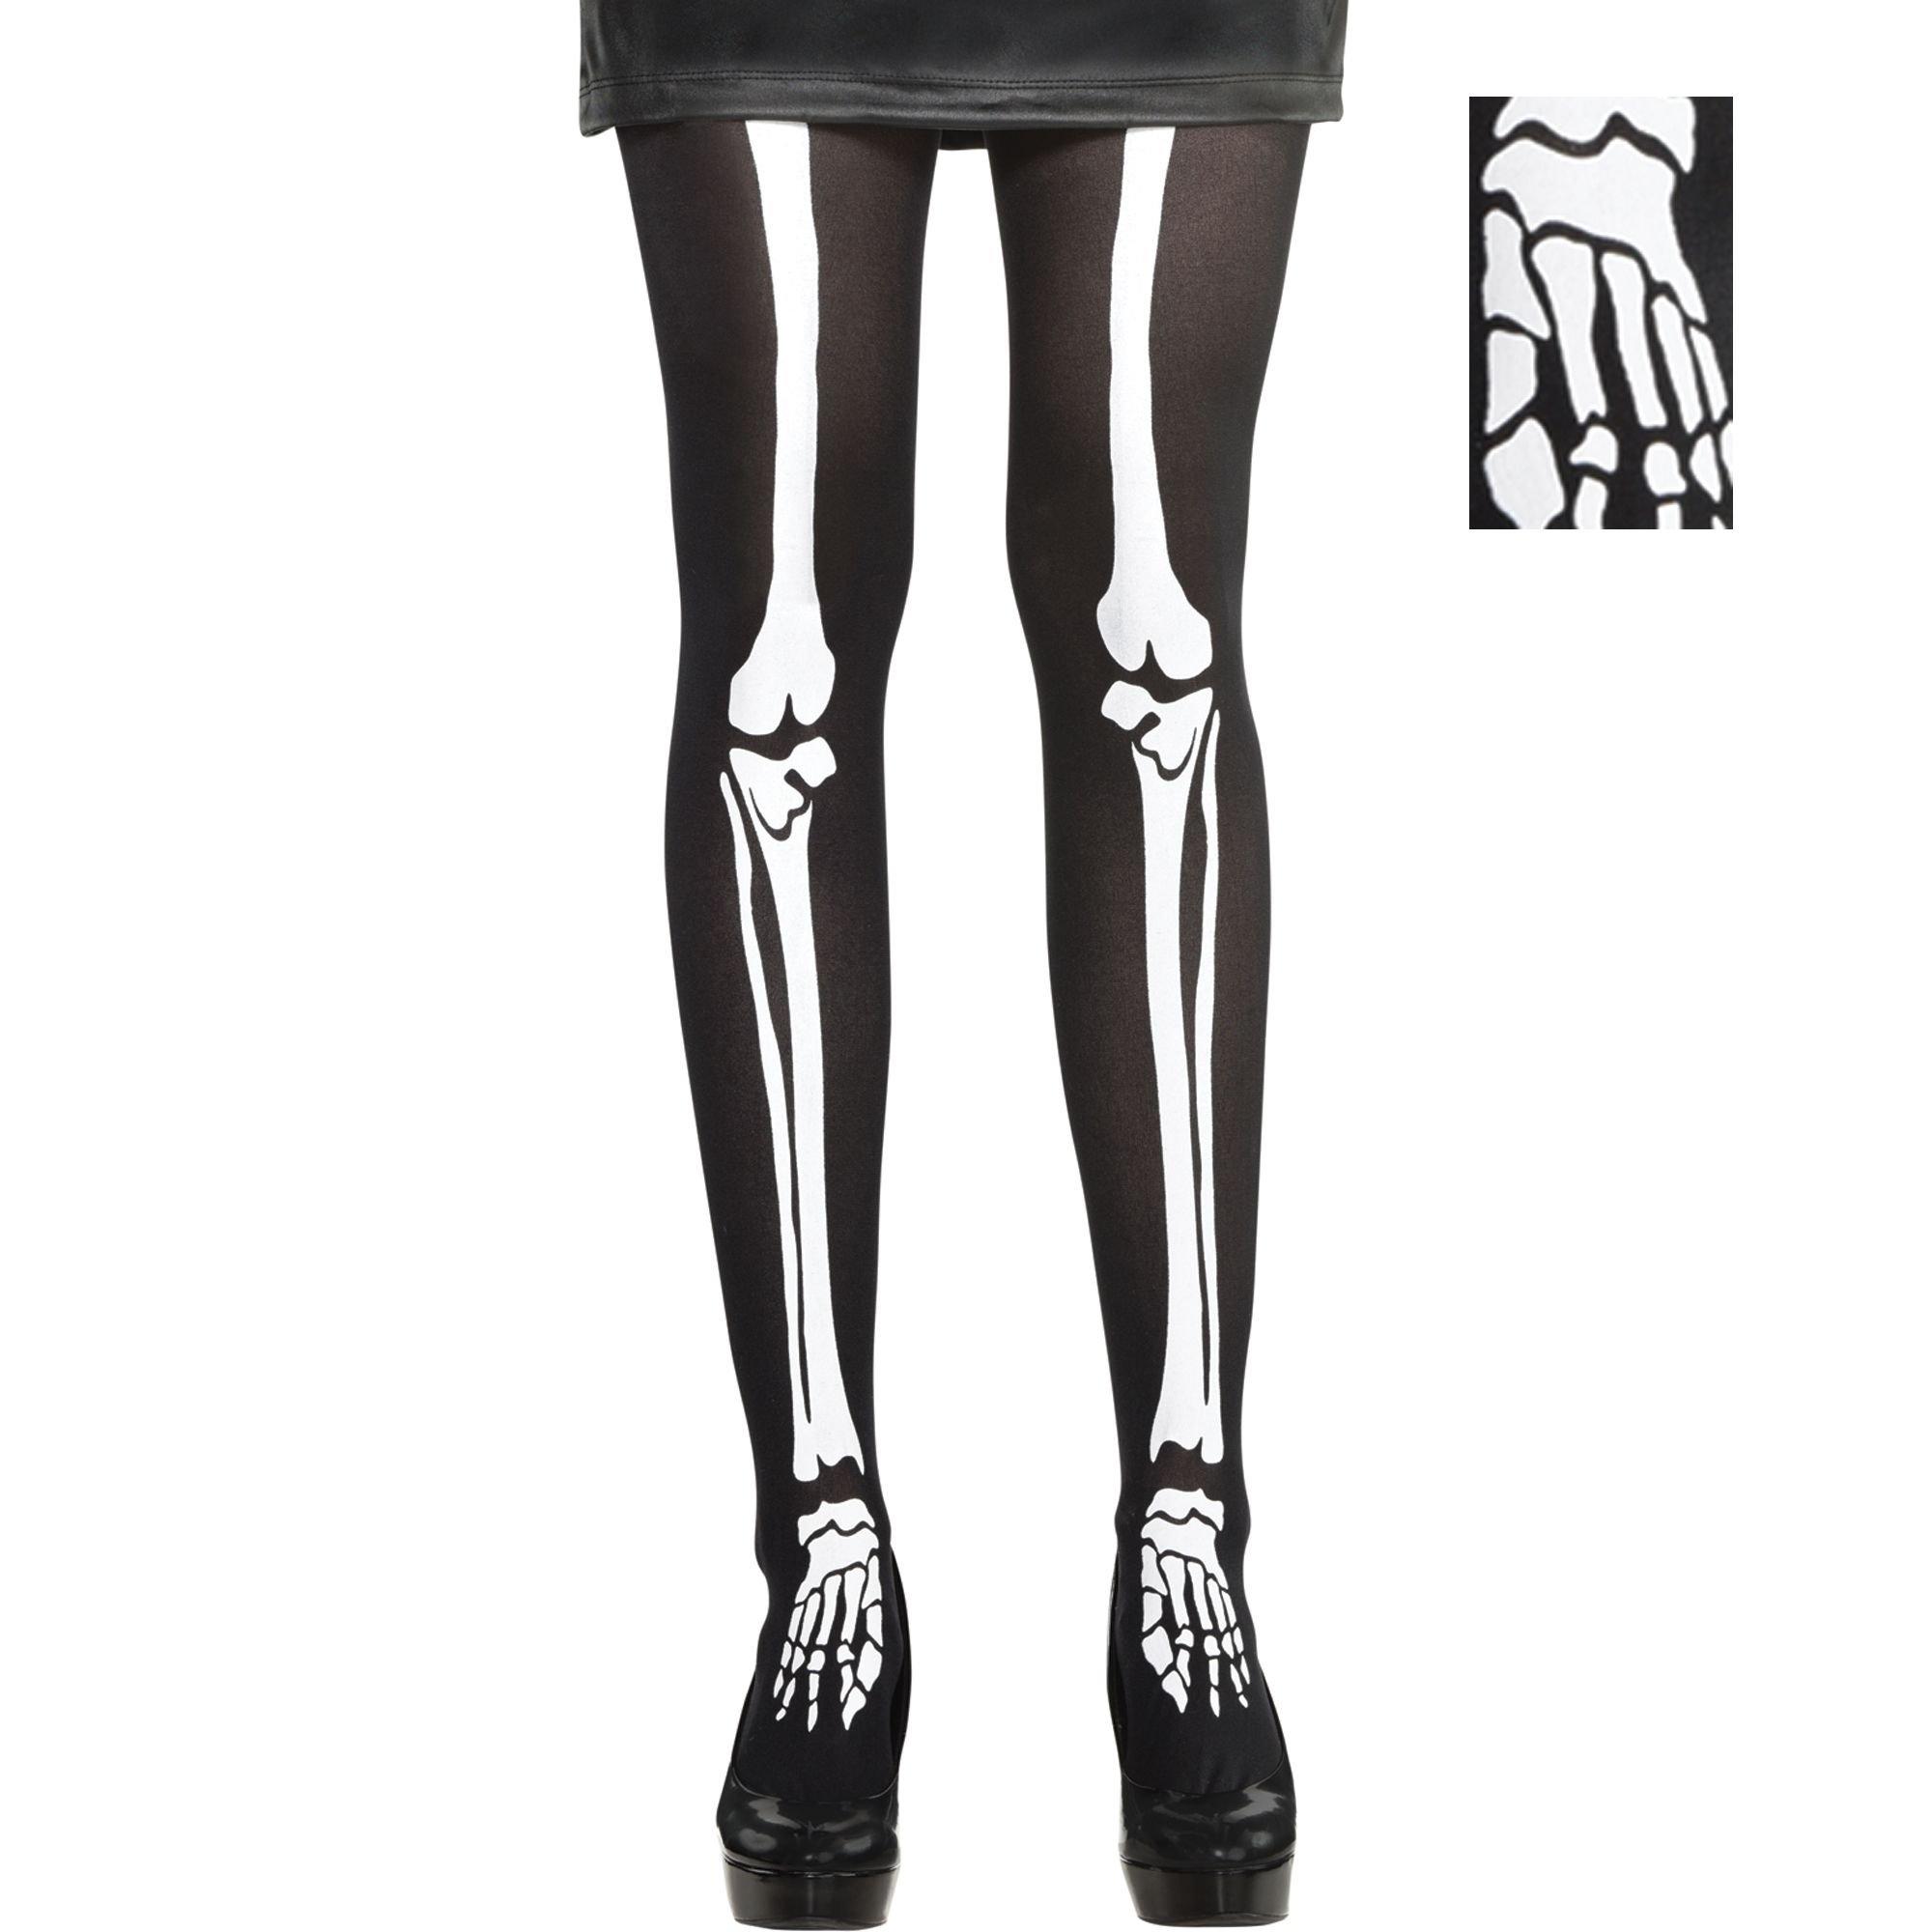 Skeleton Tights for Adults